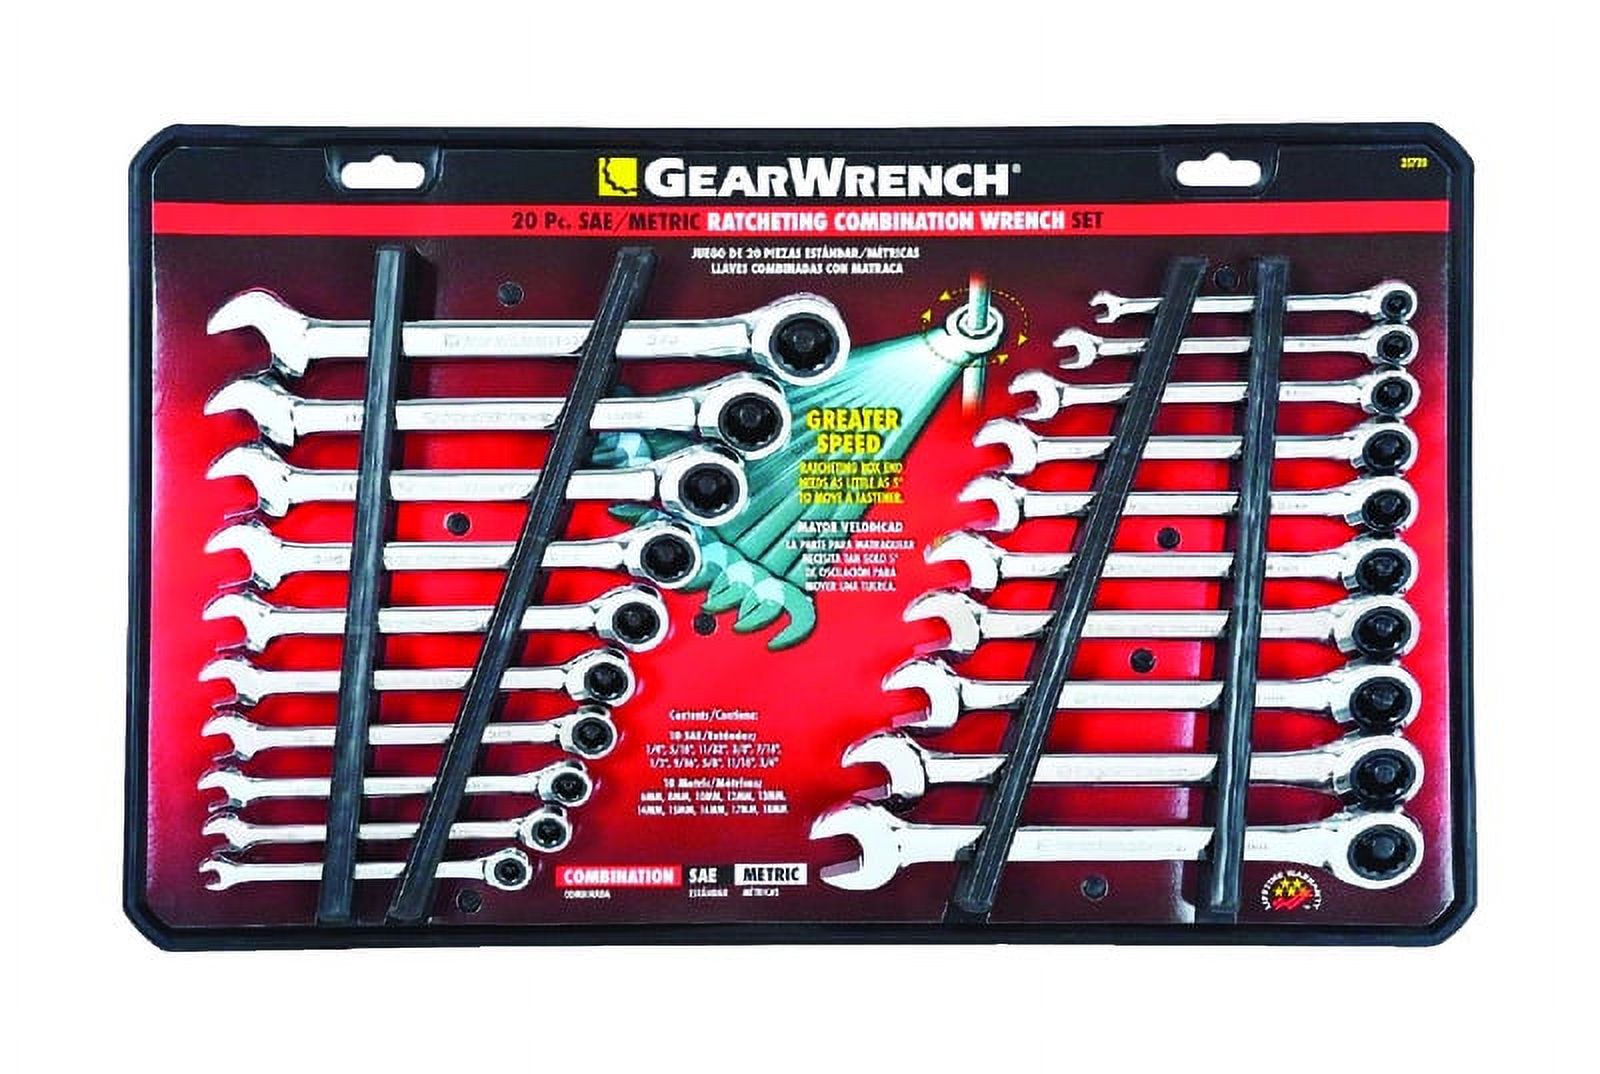 GearWrench 12 Point Metric and SAE Ratcheting Combination Wrench Set 20 Piece. - image 1 of 8